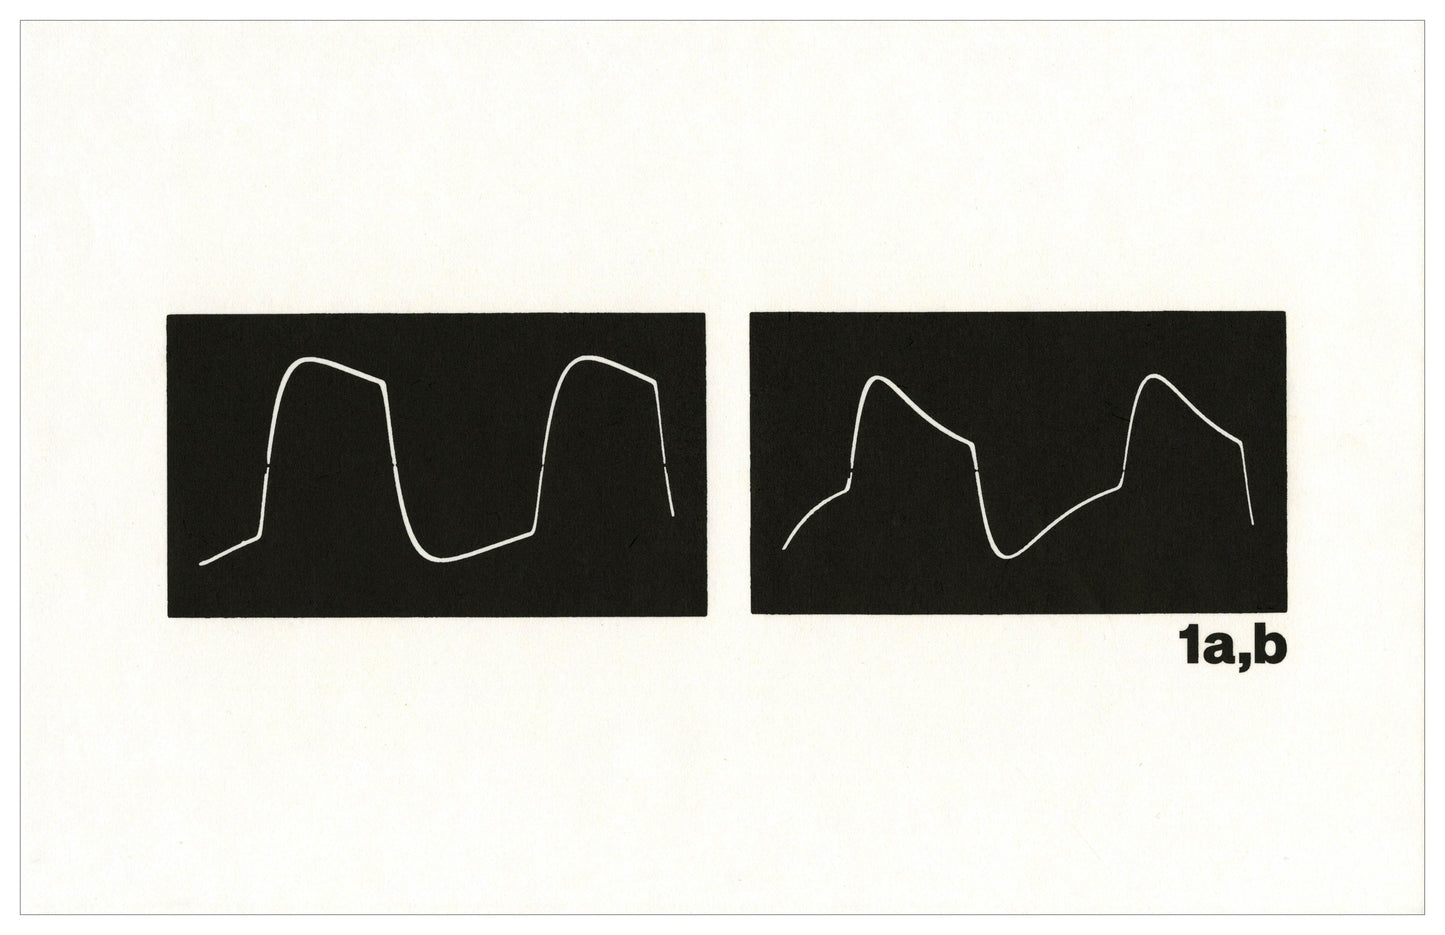 Micah Lexier - The Oscilloscope Drawings (Complete Boxset of 10 Prints)